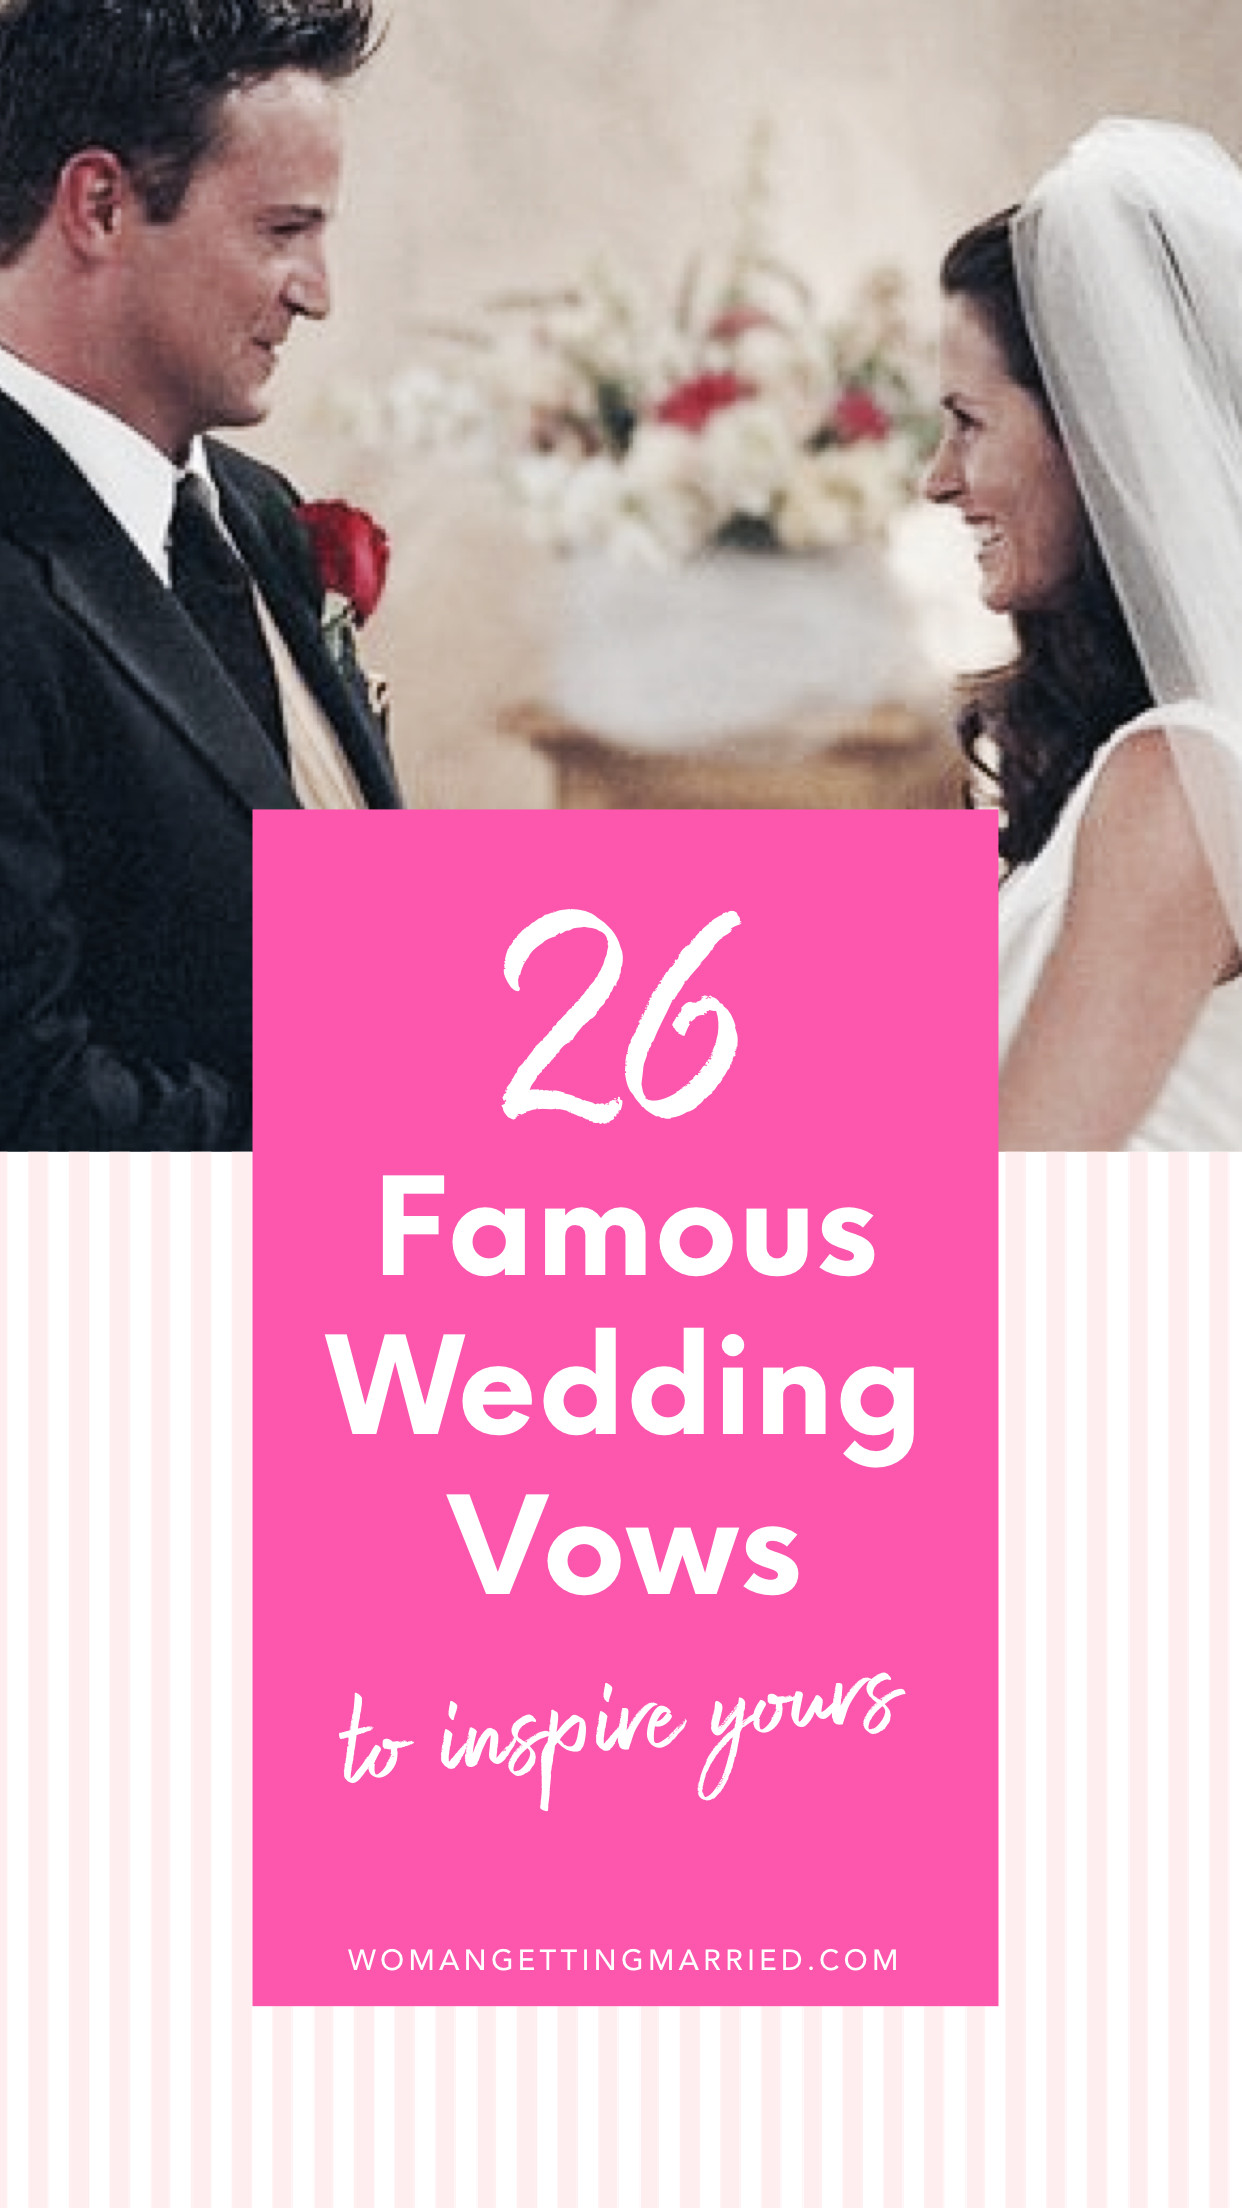 Wedding Vows
 26 Famous Wedding Vows to Inspire Your Own